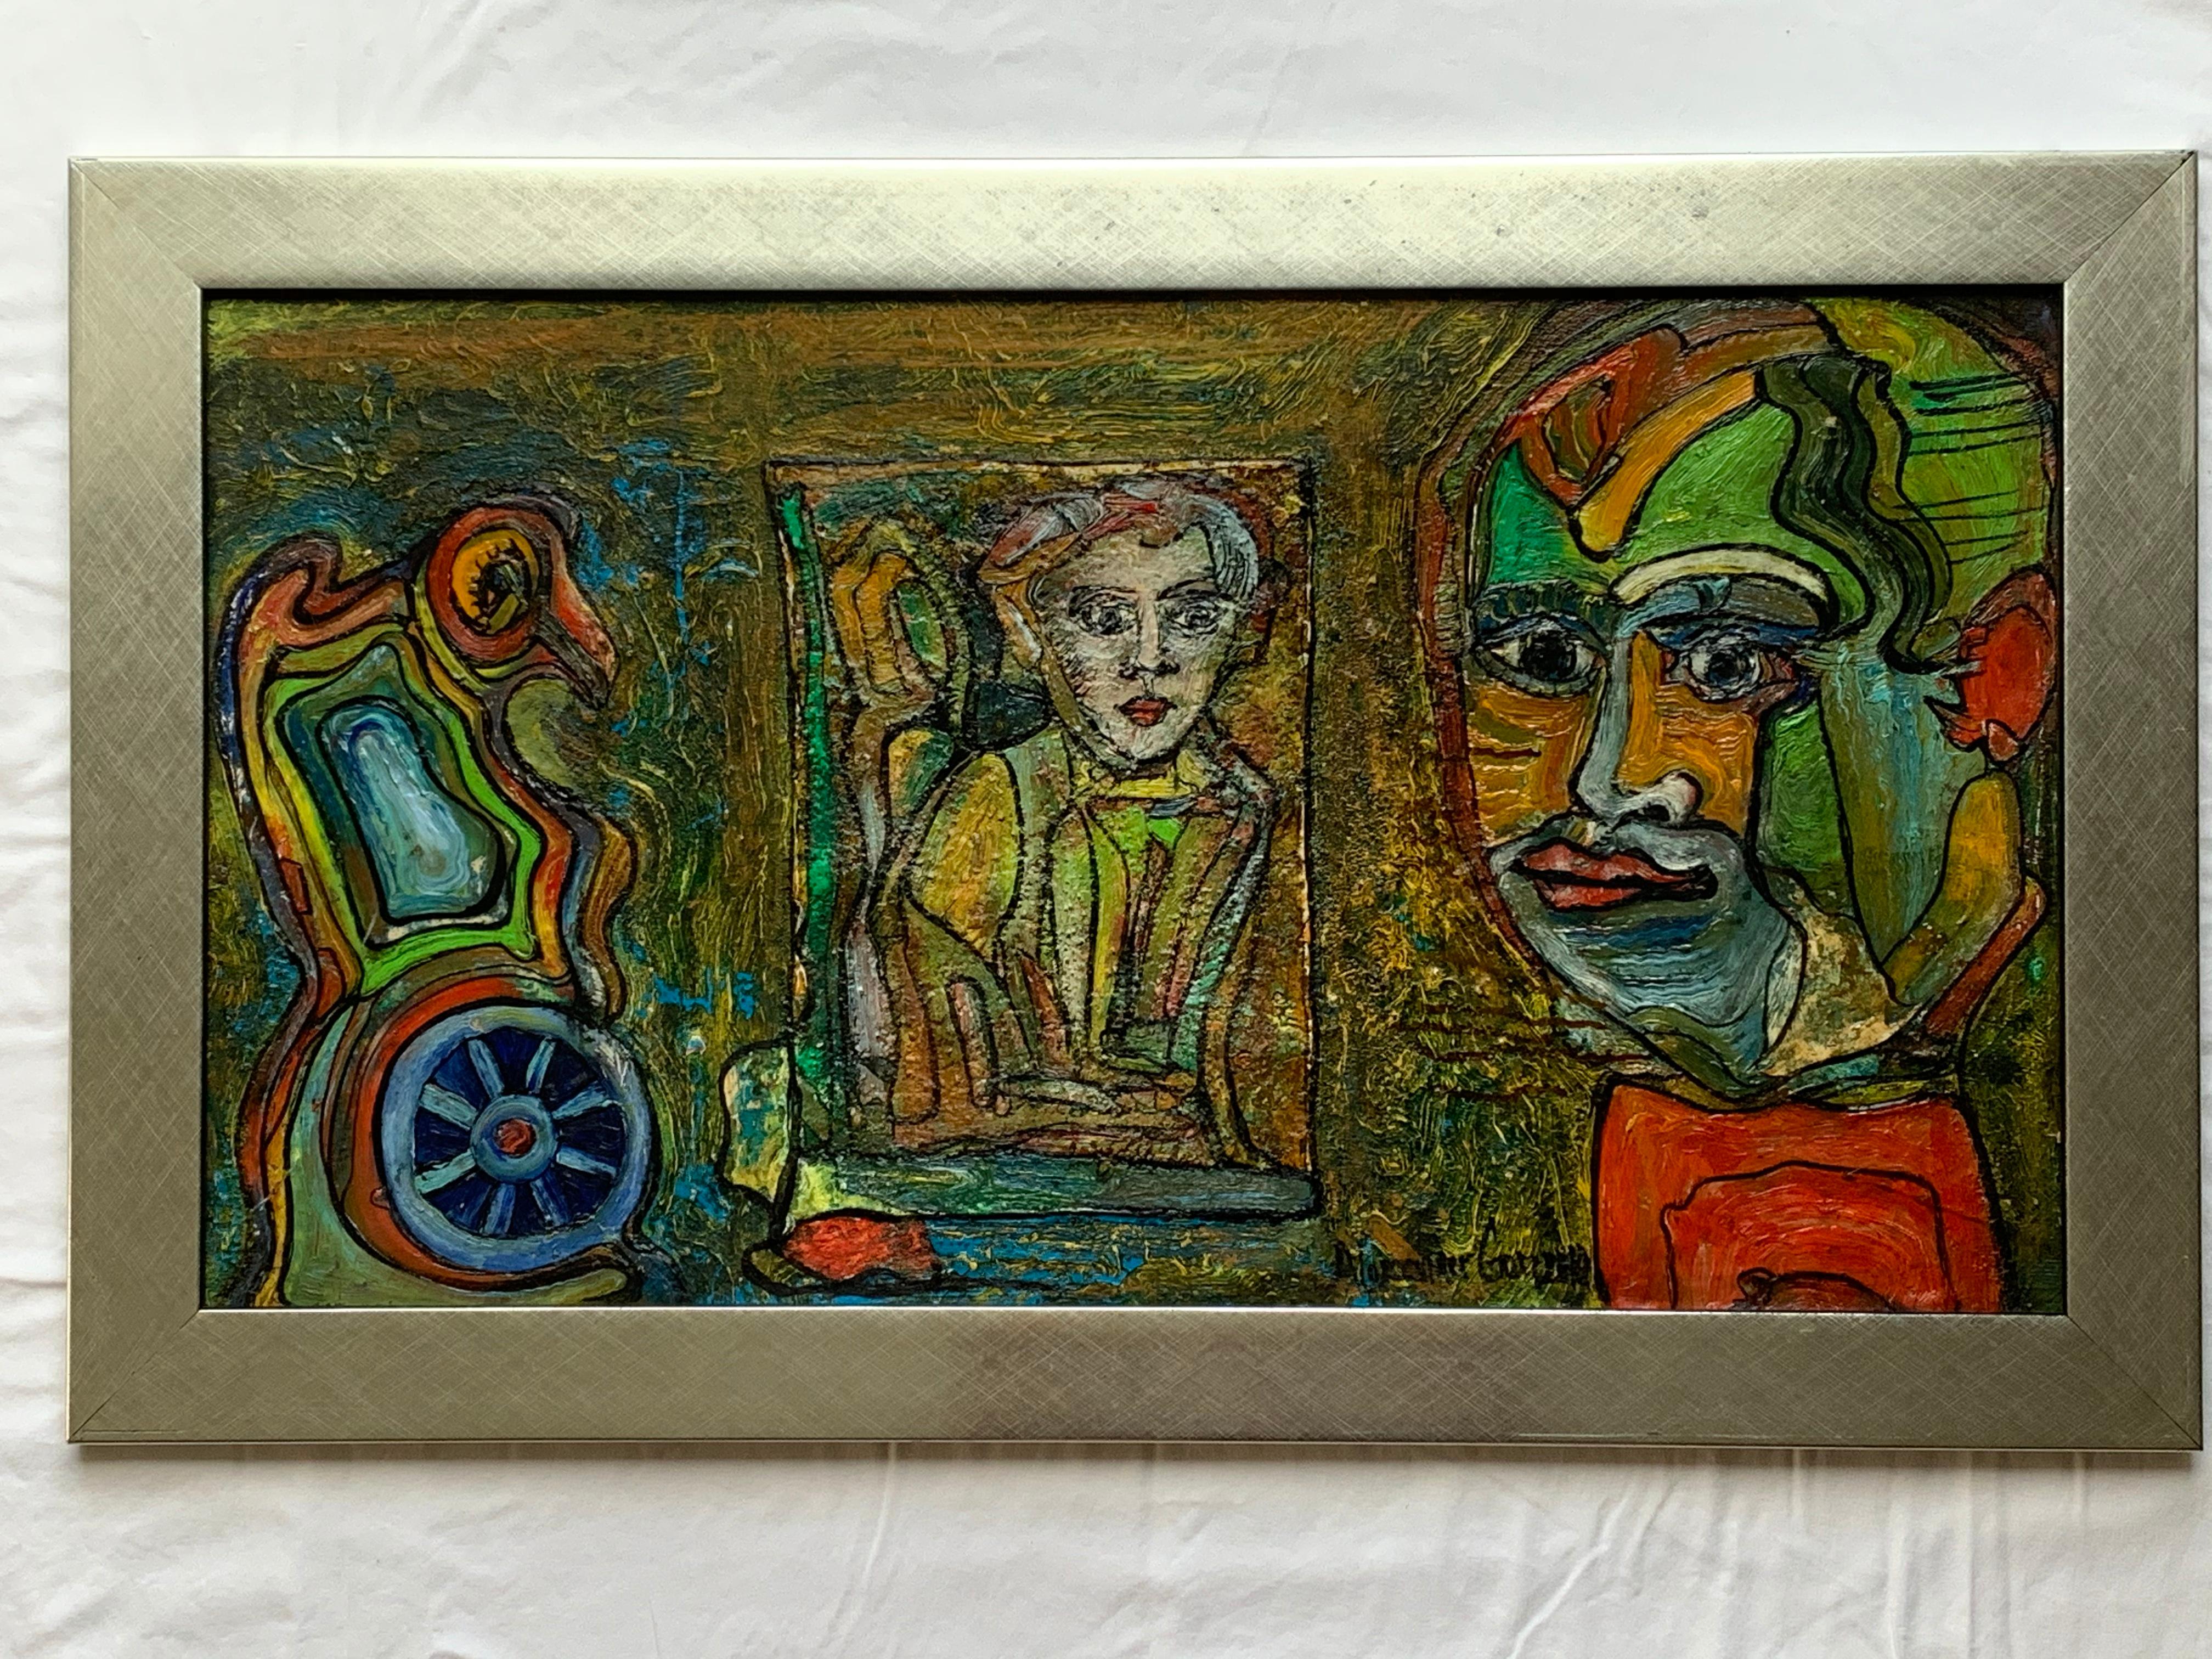 Unique Original Alexander Gore Folk oil painting with Verified Signature and stamp of authenticity. Beautiful shades of blue, green, red, orange, and yellow.